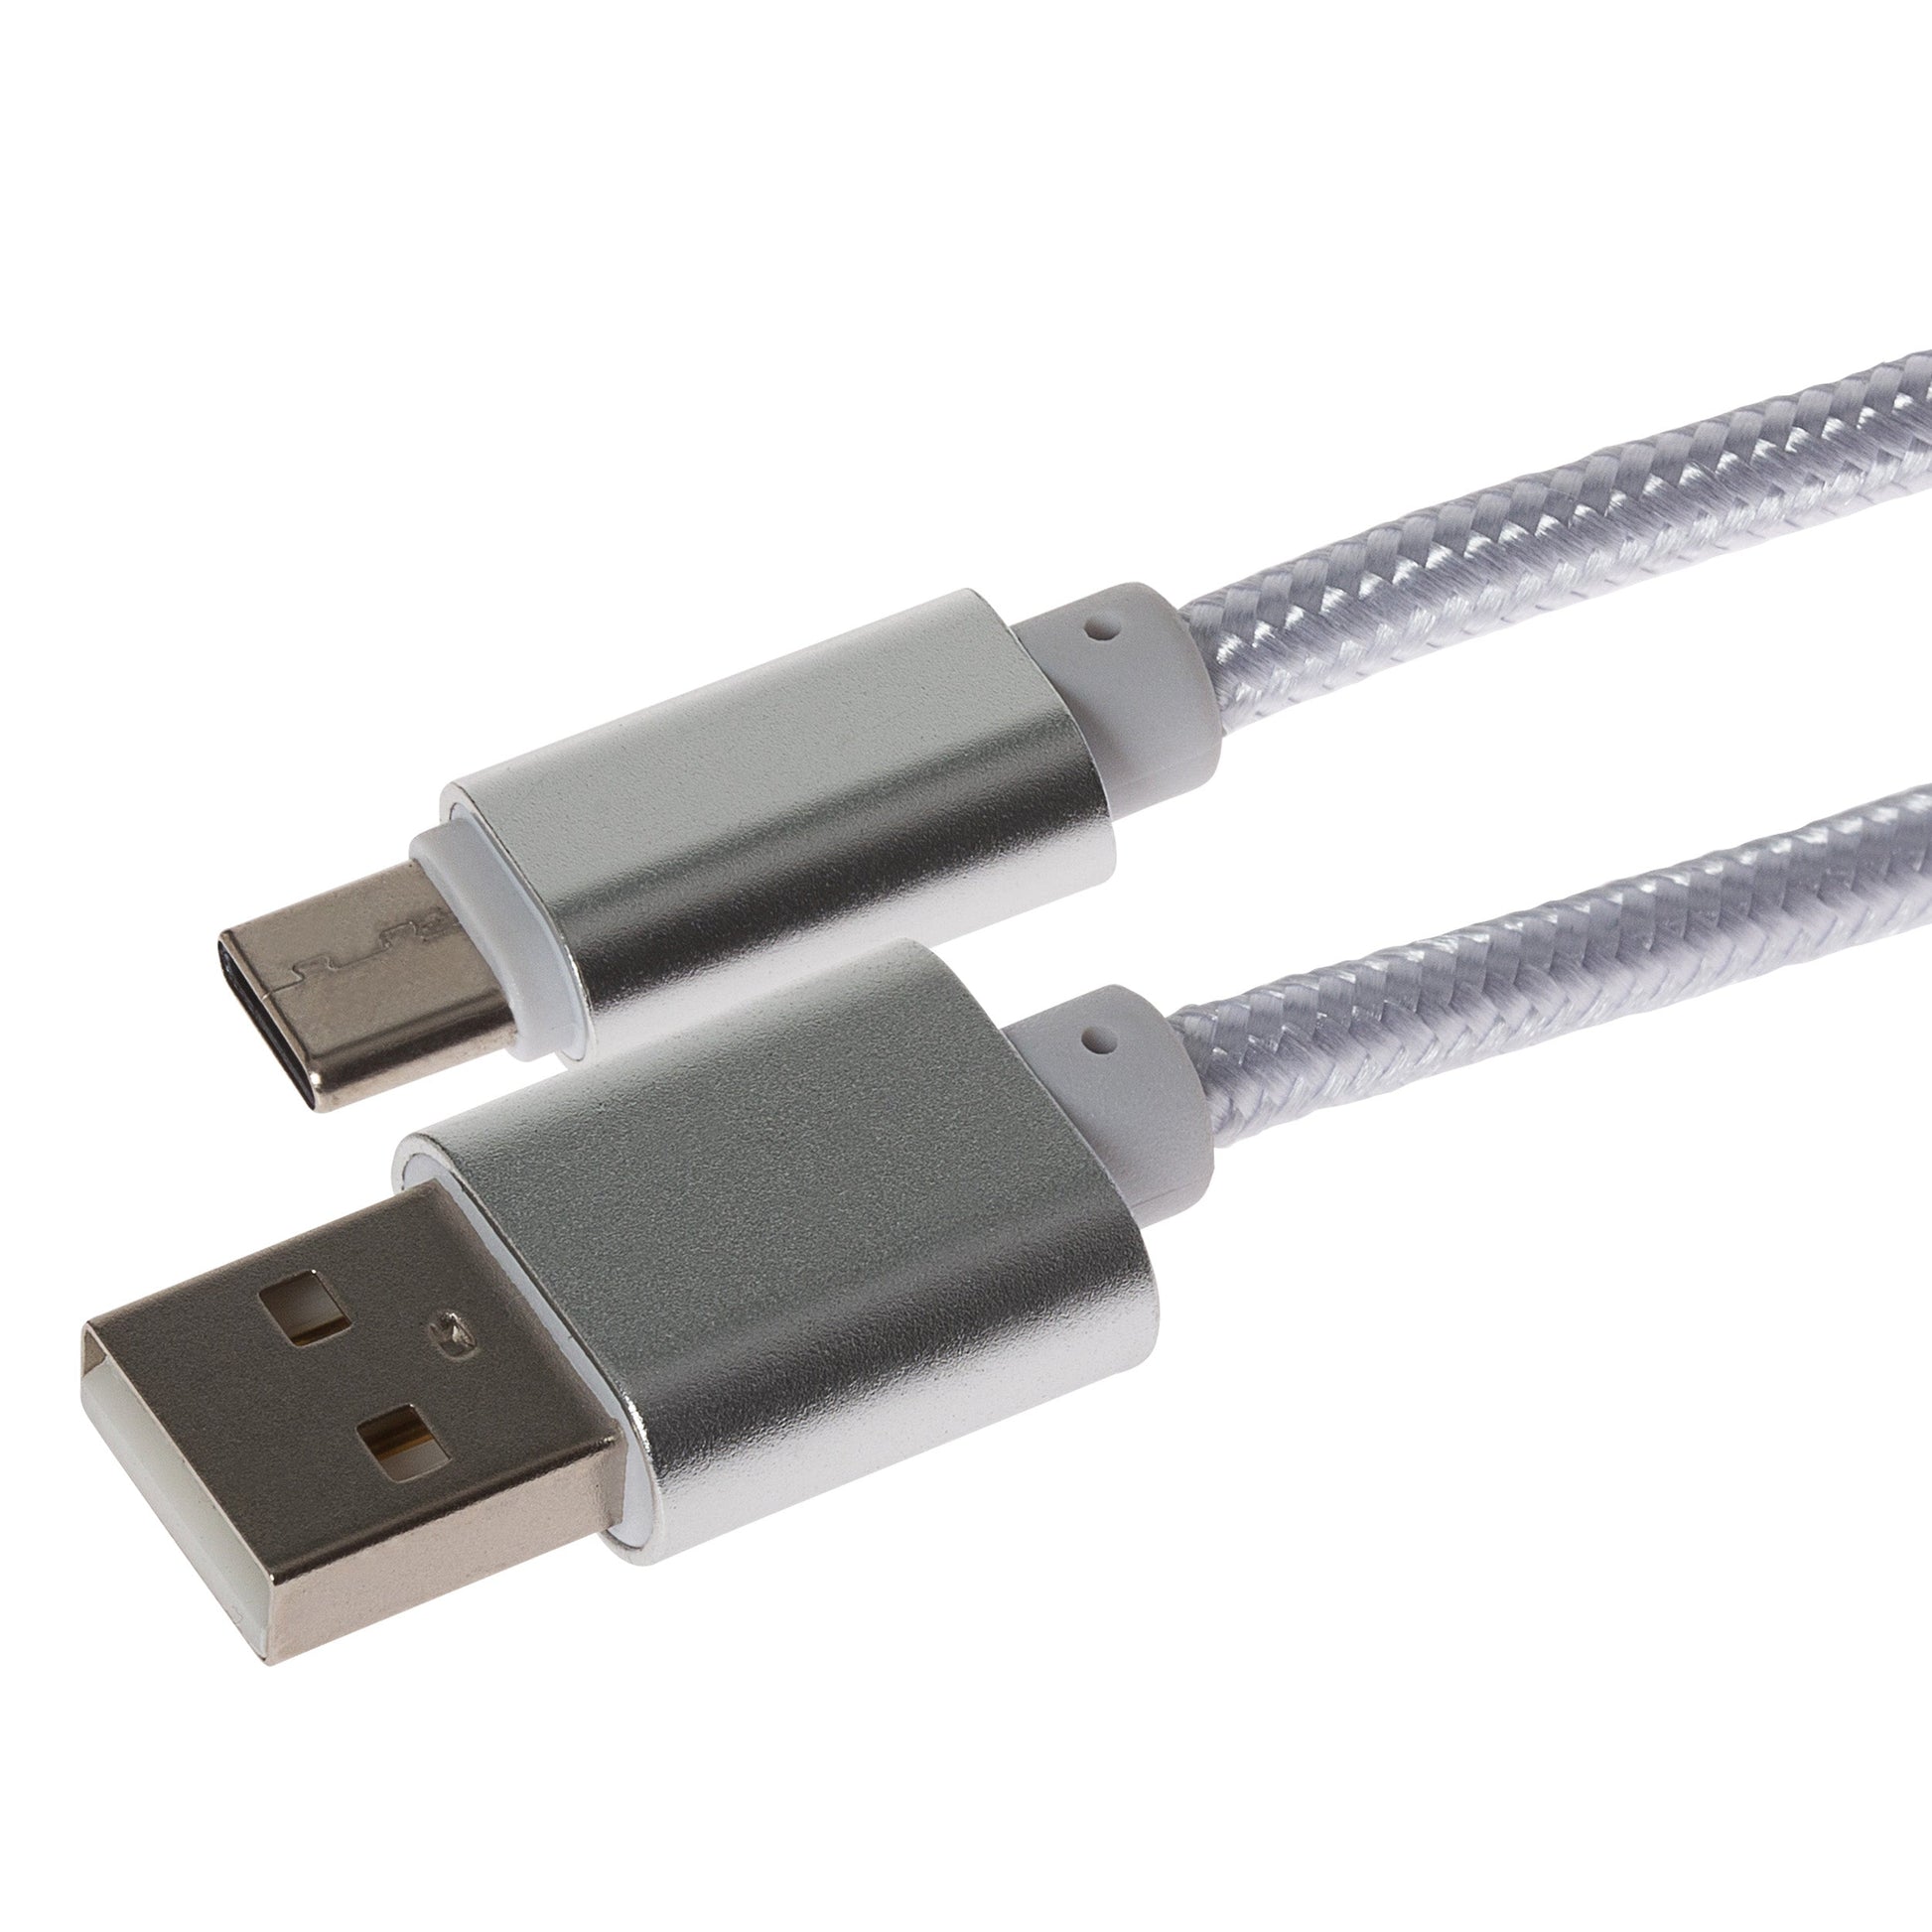 Maplin USB-C to USB-A Braided Cable - Silver, 3m - maplin.co.uk